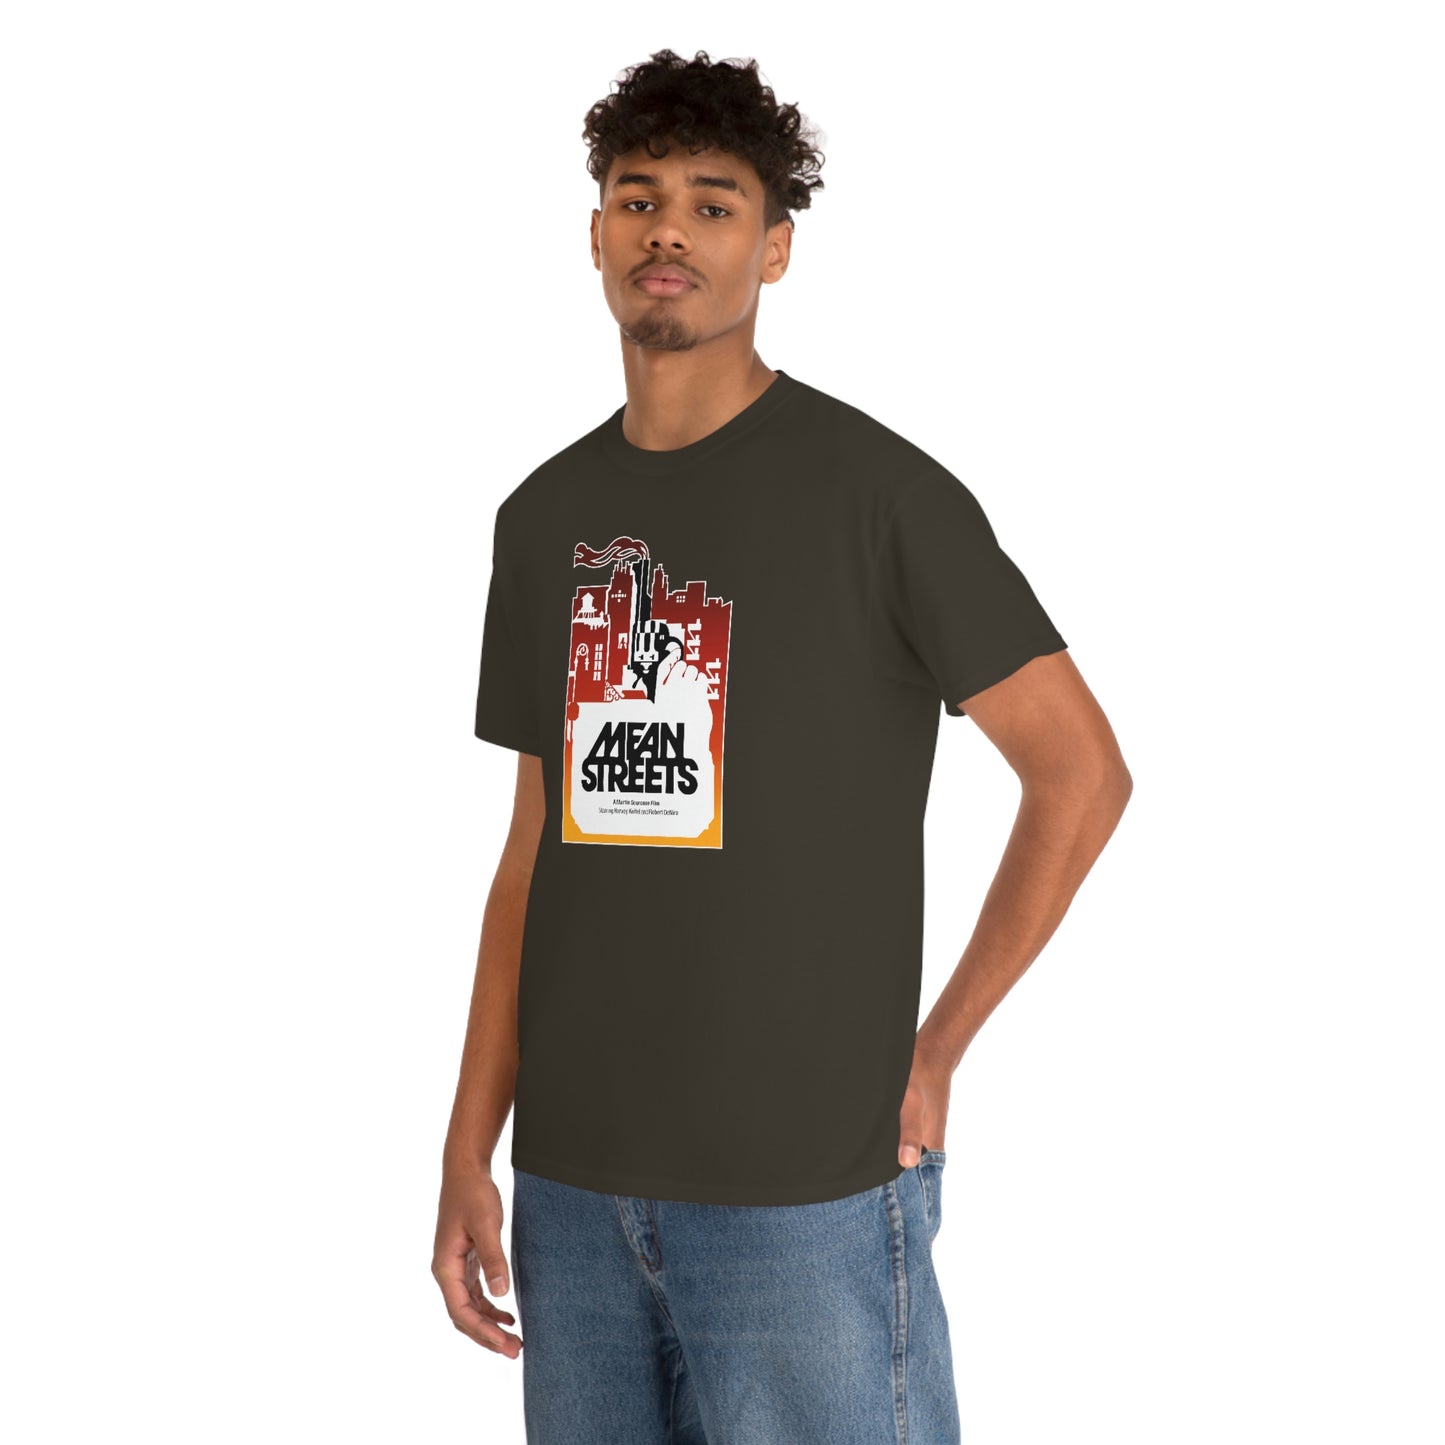 Mean Streets T-Shirt